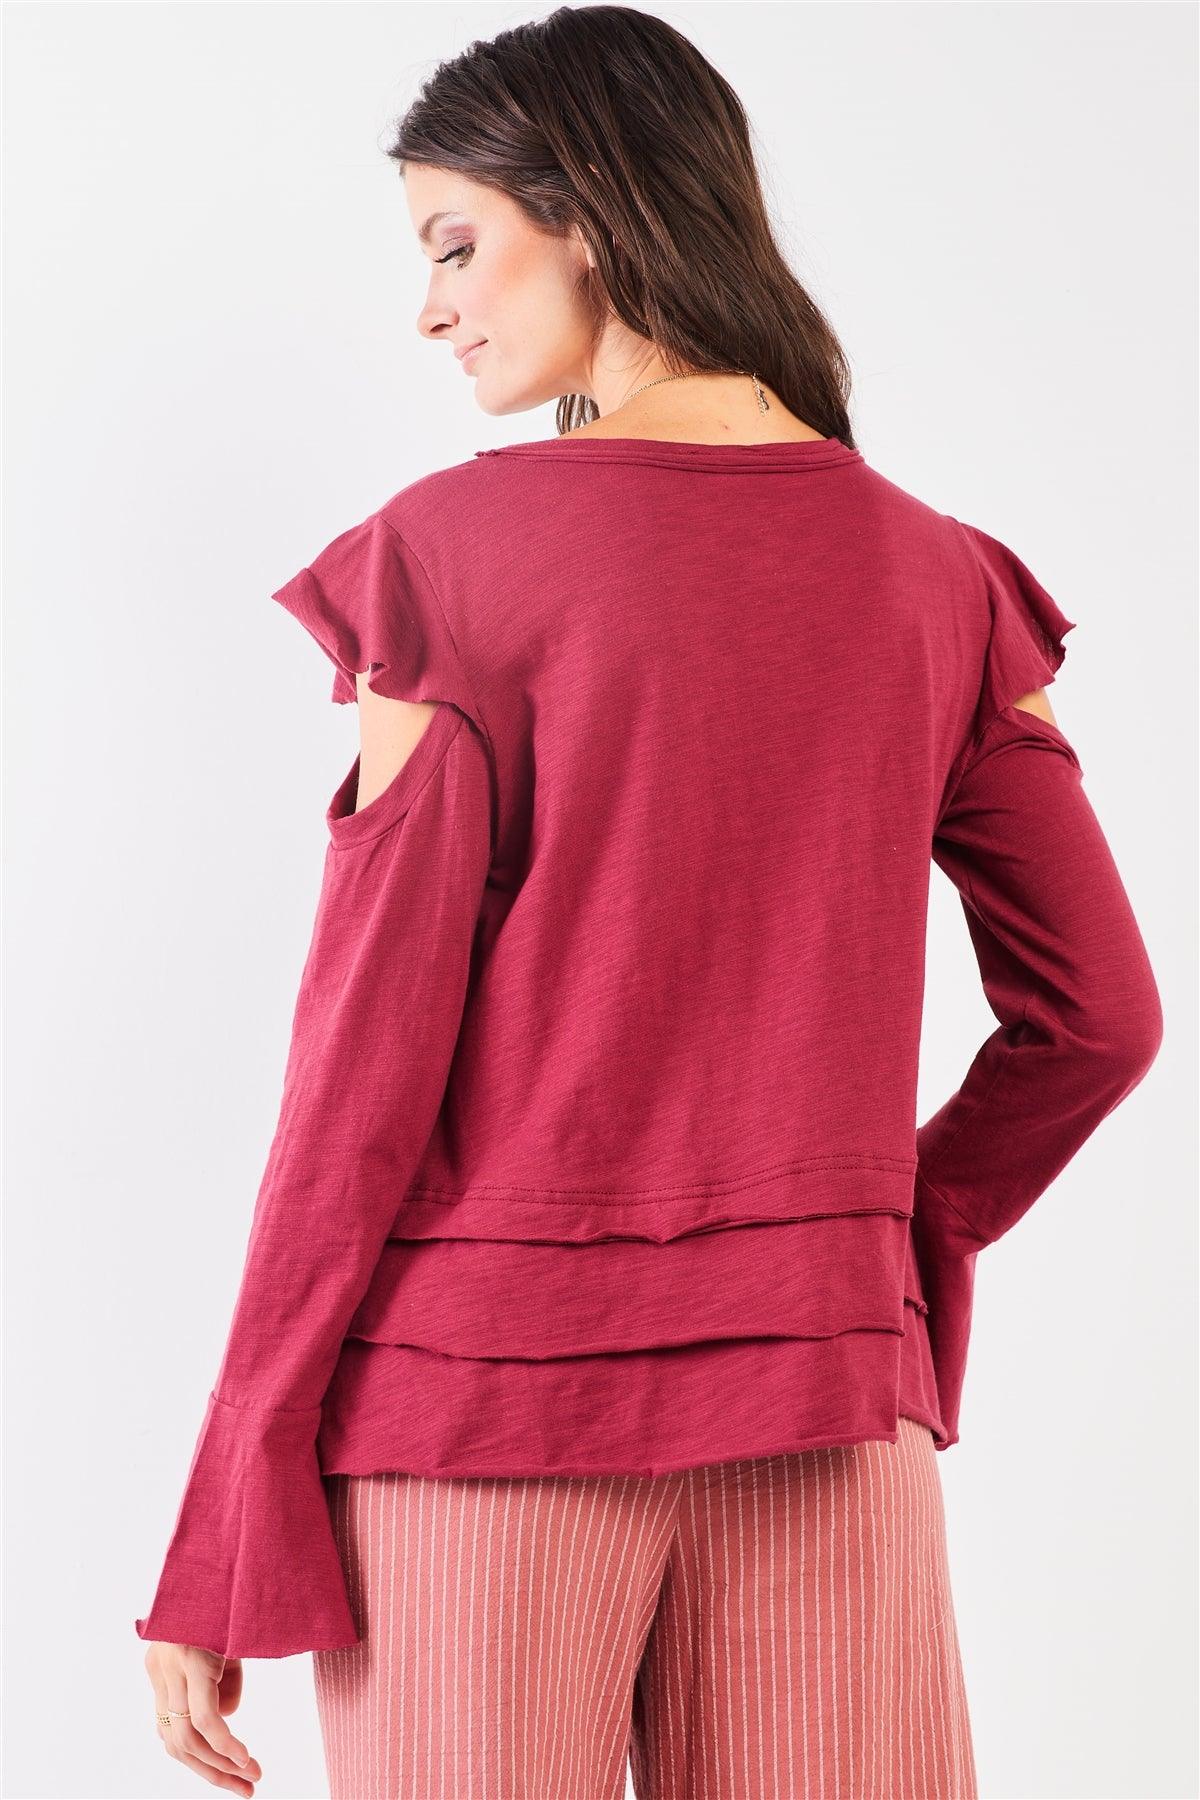 Wine Cut-Out Shoulder Bell Sleeve Raw Edge Detail Layered Hem Top /1-1-2